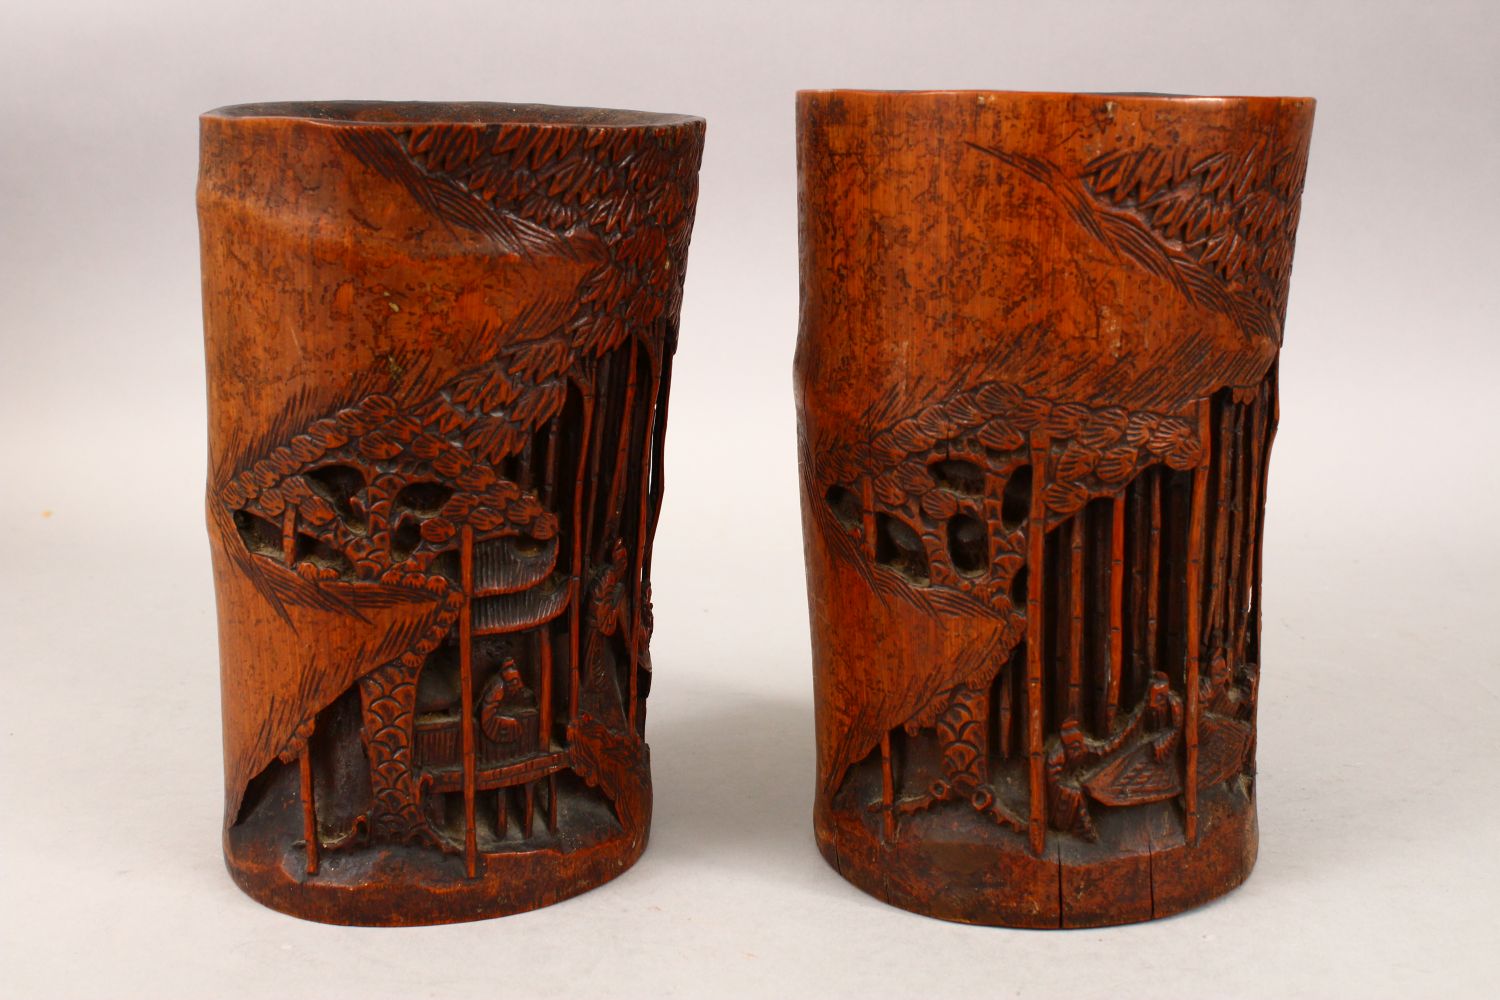 A GOOD PAIR OF 19TH CENTURY CHINESE BAMBOO BRUSH POTS, each decorated in relief to depict working - Image 4 of 8